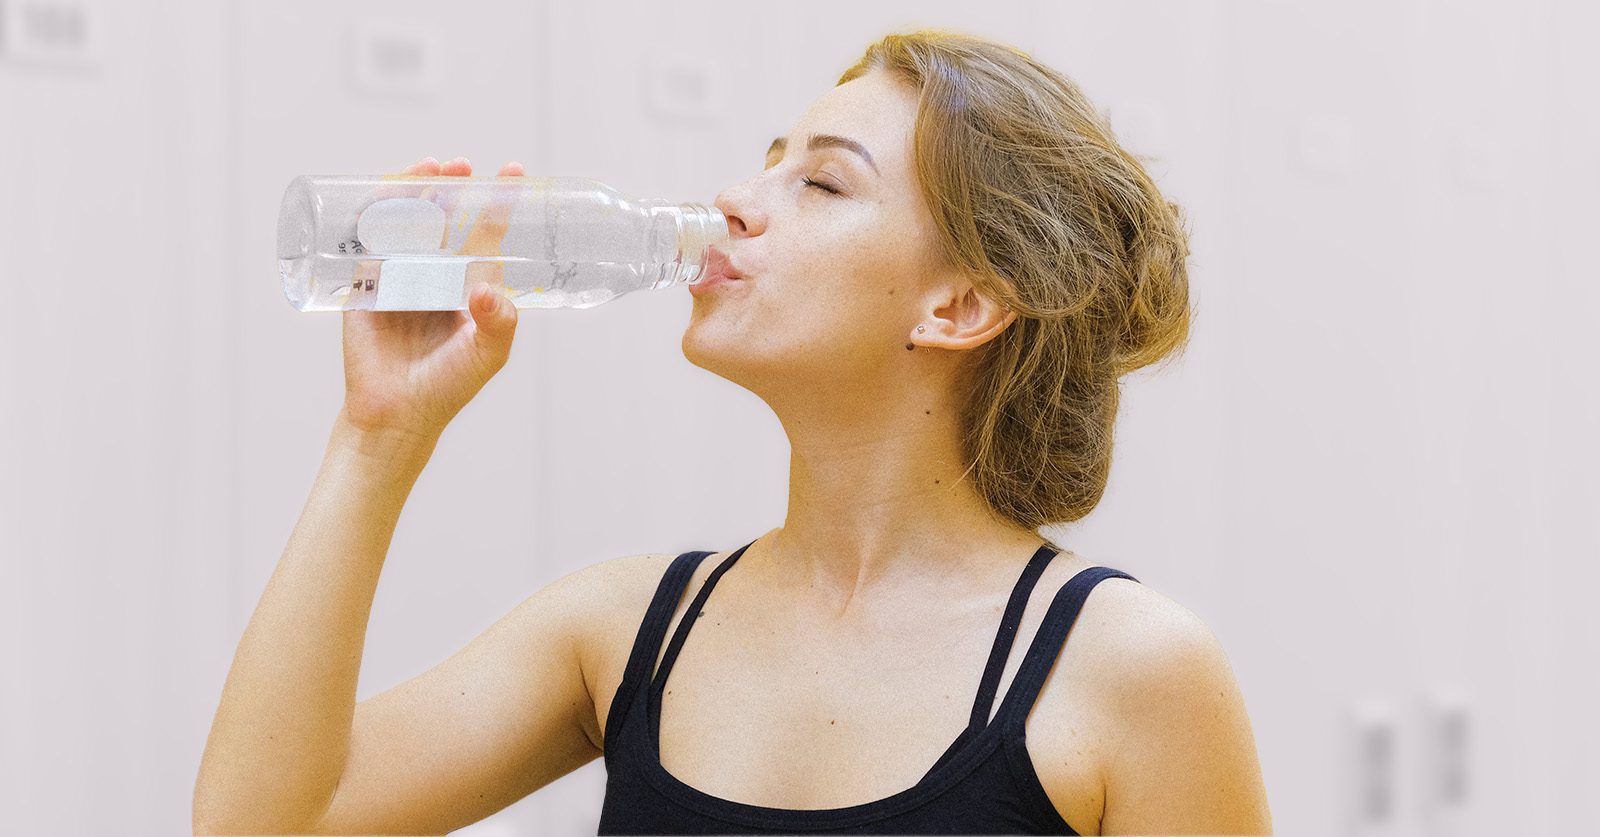 self care tips for busy moms: drink more water